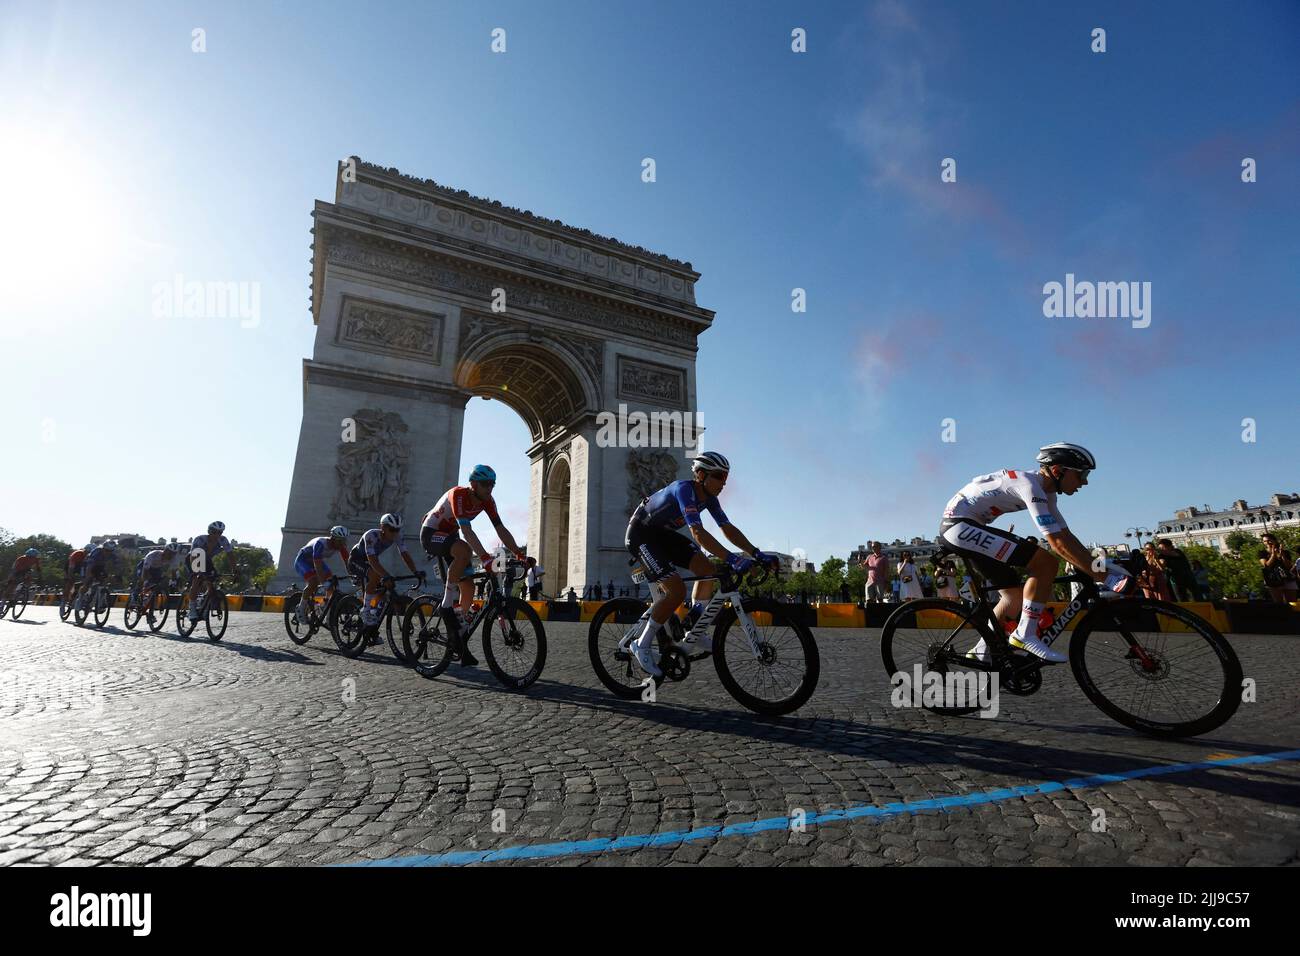 Cycling - Tour de France - Stage 21 - Paris La Defense Arena to Champs-Elysees - France - July 24, 2022 UAE Team Emirates' Tadej Pogacar in action with riders passing the Arc de Triomphe during stage 21 REUTERS/Gonzalo Fuentes Stock Photo